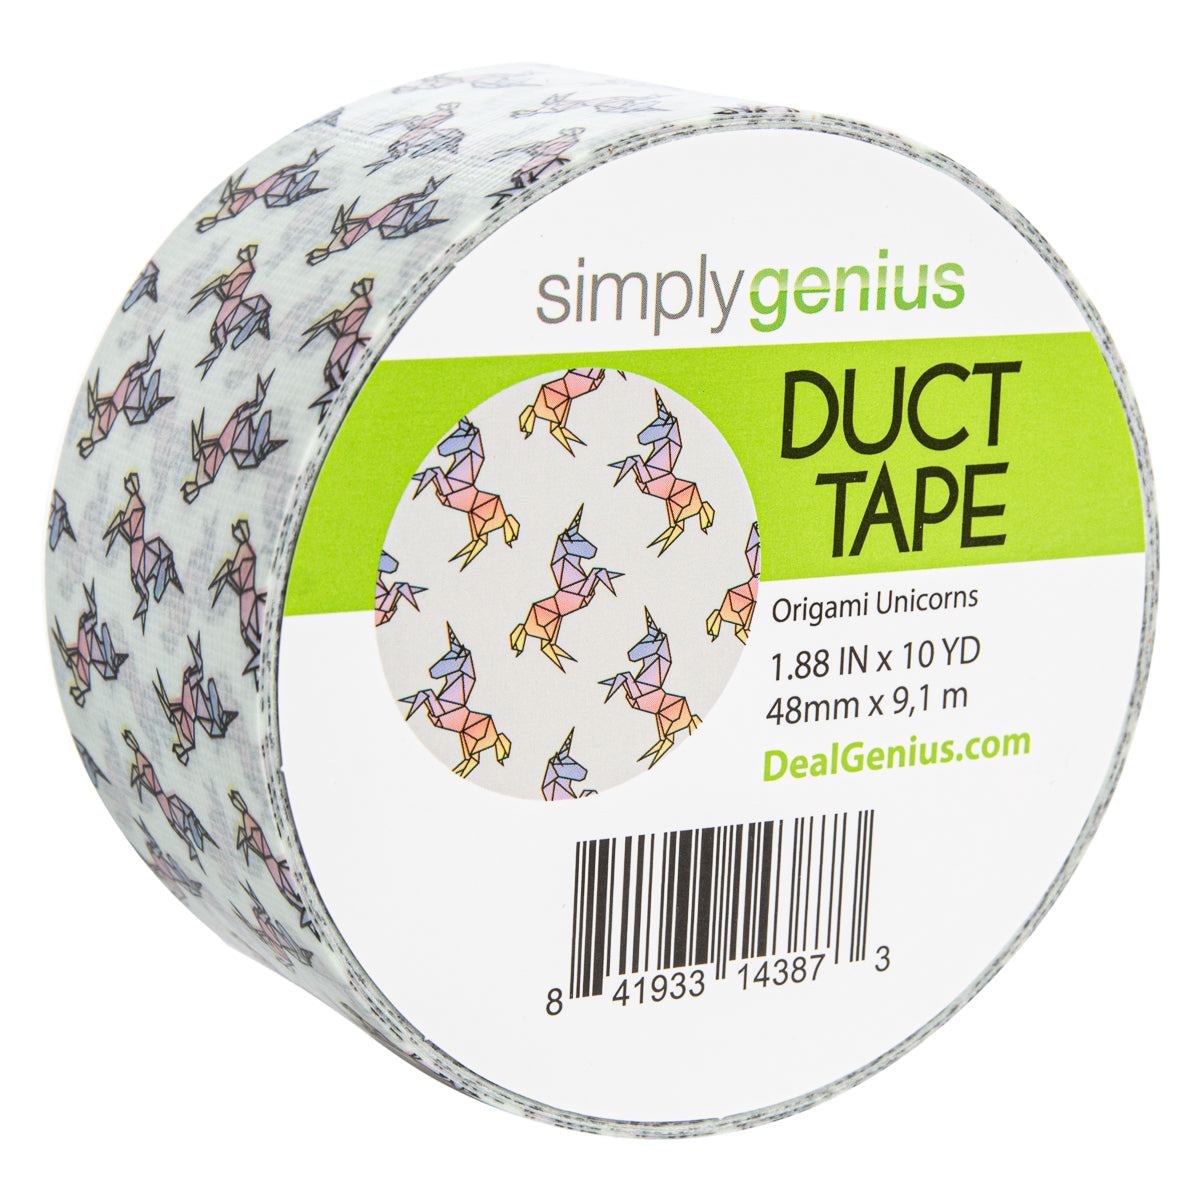 Take a look at our - Platypus Designer Duct Tape by Fortis